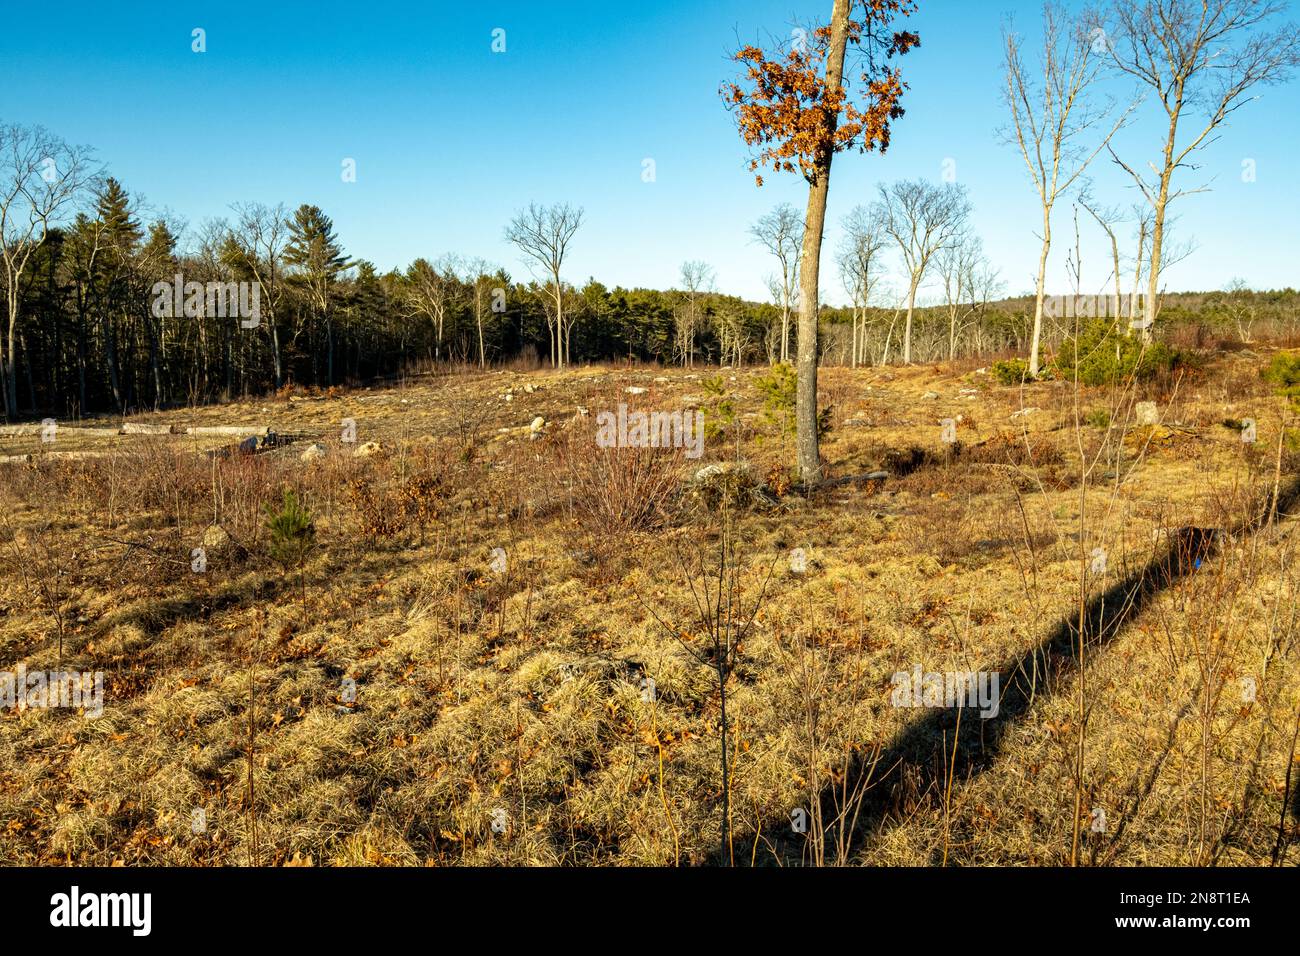 A clear cut of forest land in Massachusetts Stock Photo